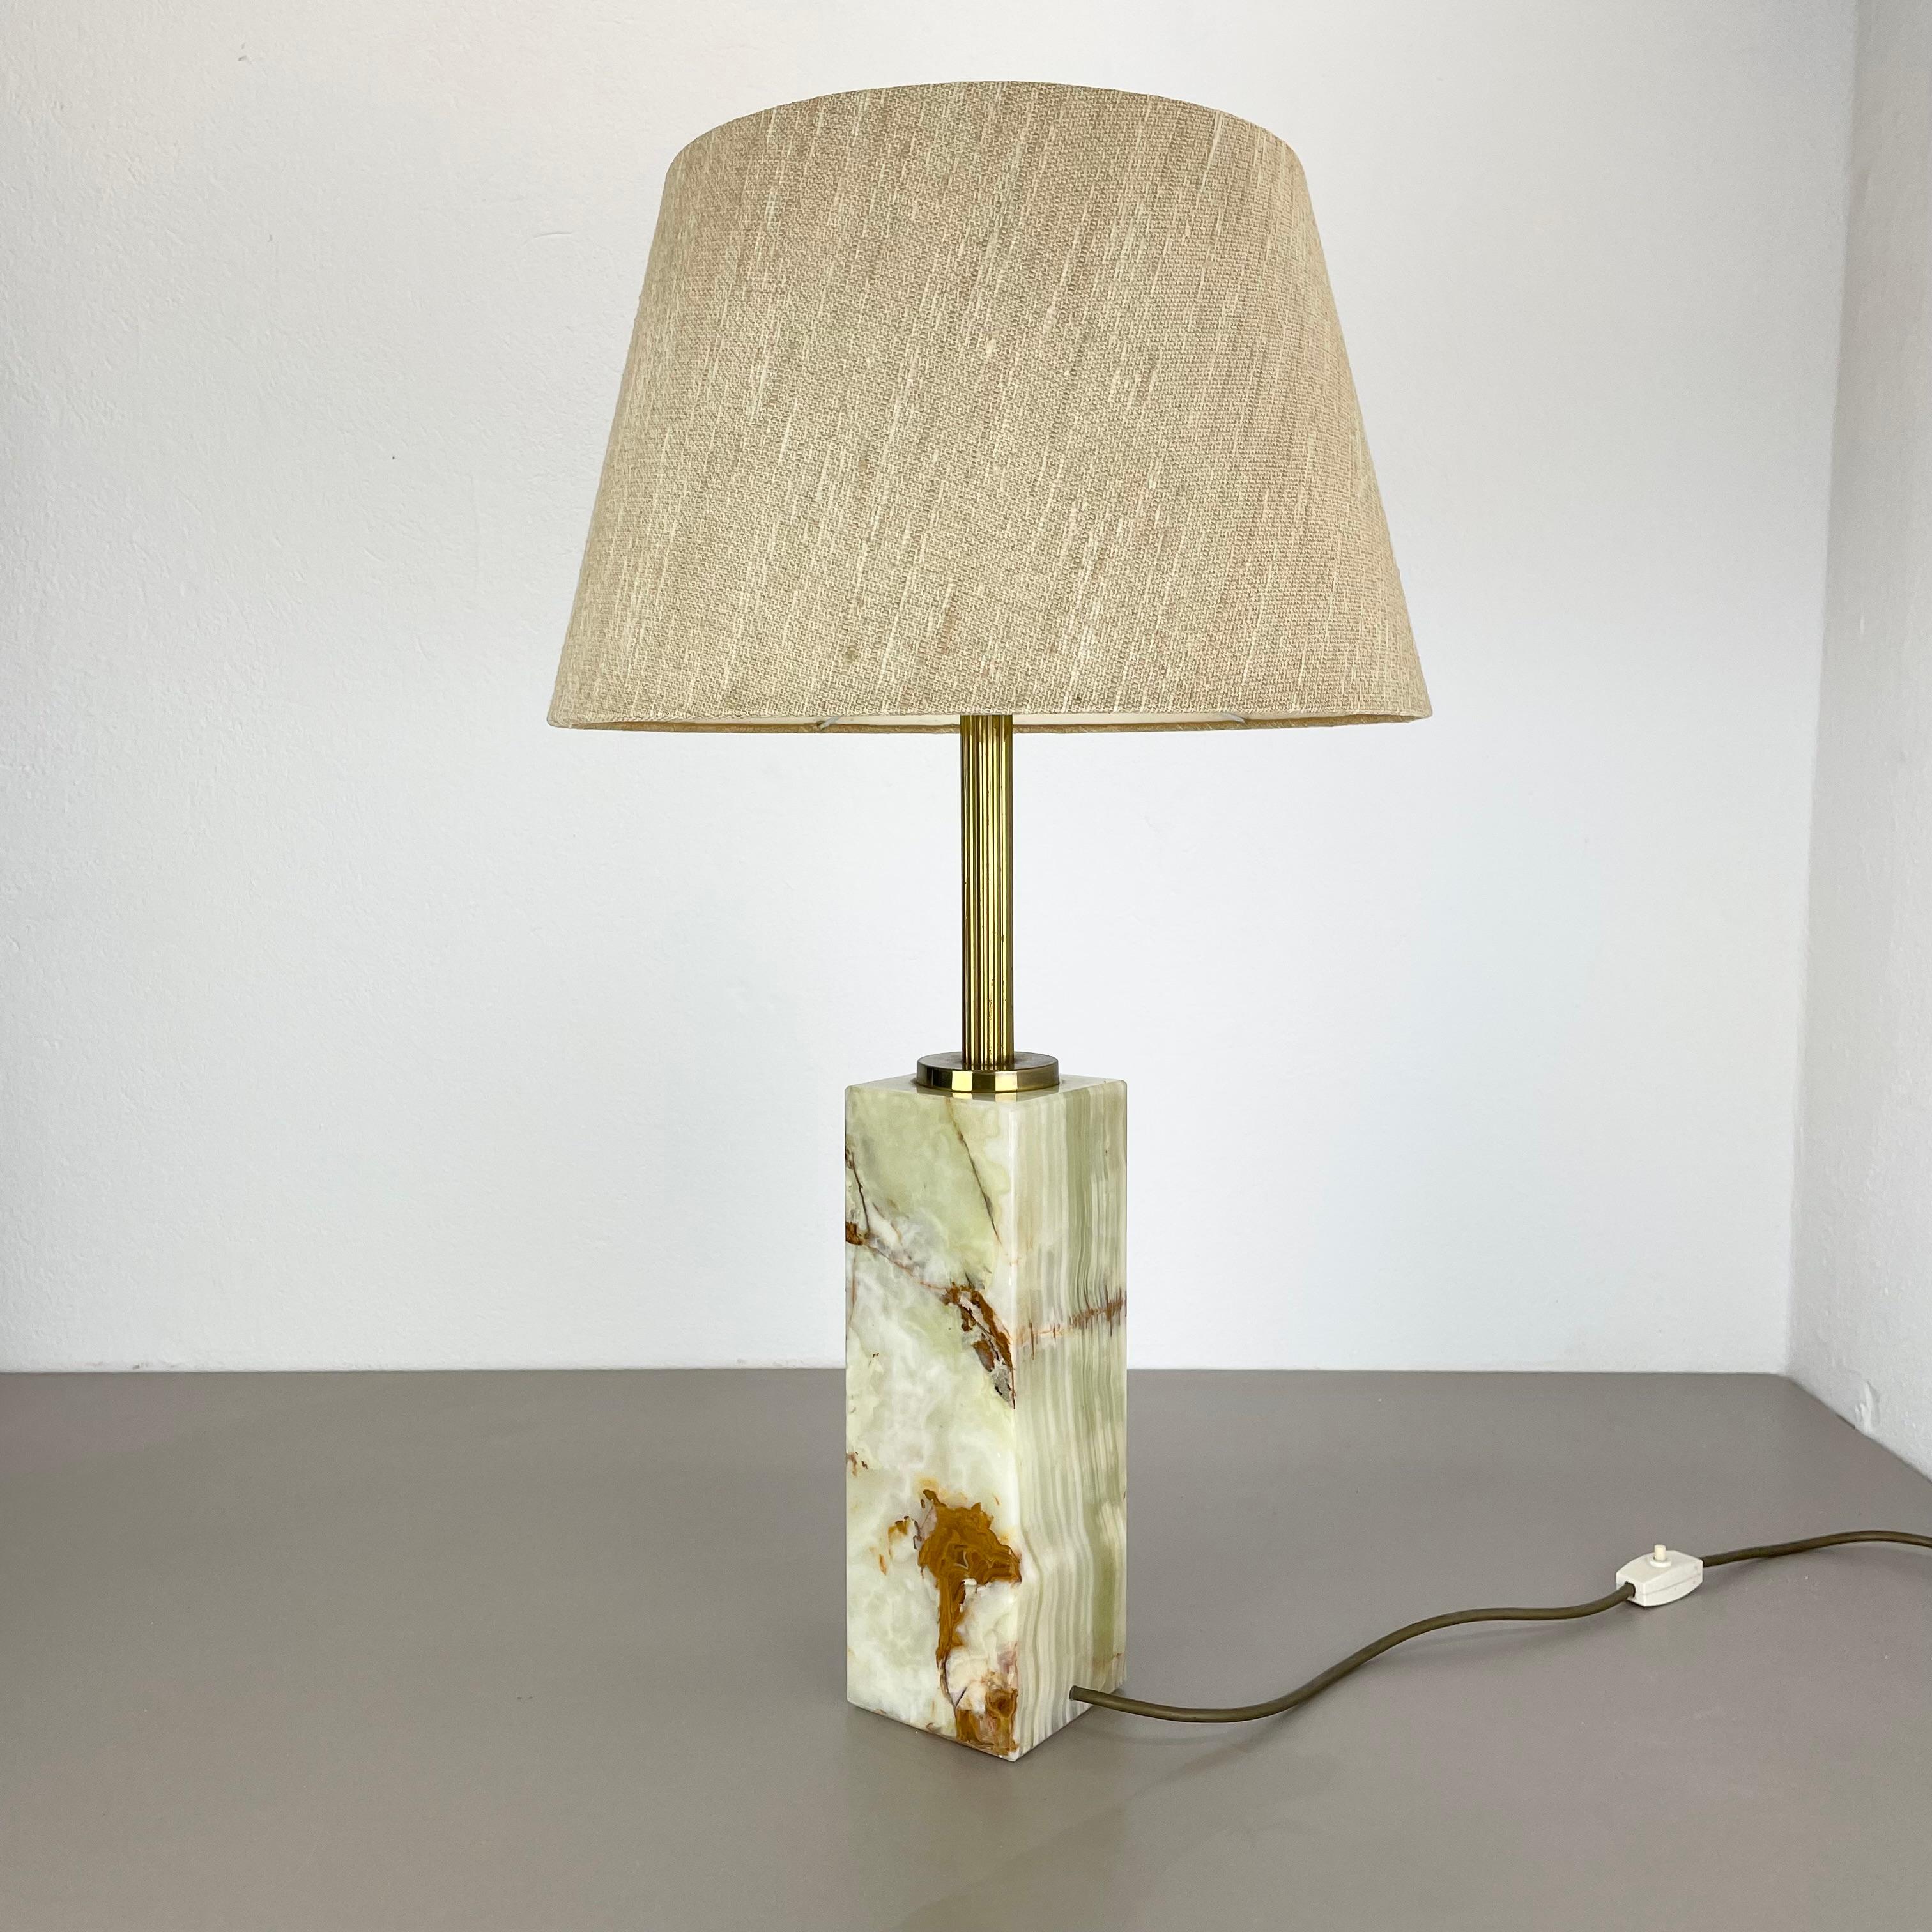 Article:

Impressive large onyx marble light base stand


Origin:

Italy


Decade:

1960s





This original vintage light base element is made of high quality onyx marble standing in a nice scubic haped form with a brass brass element with socket